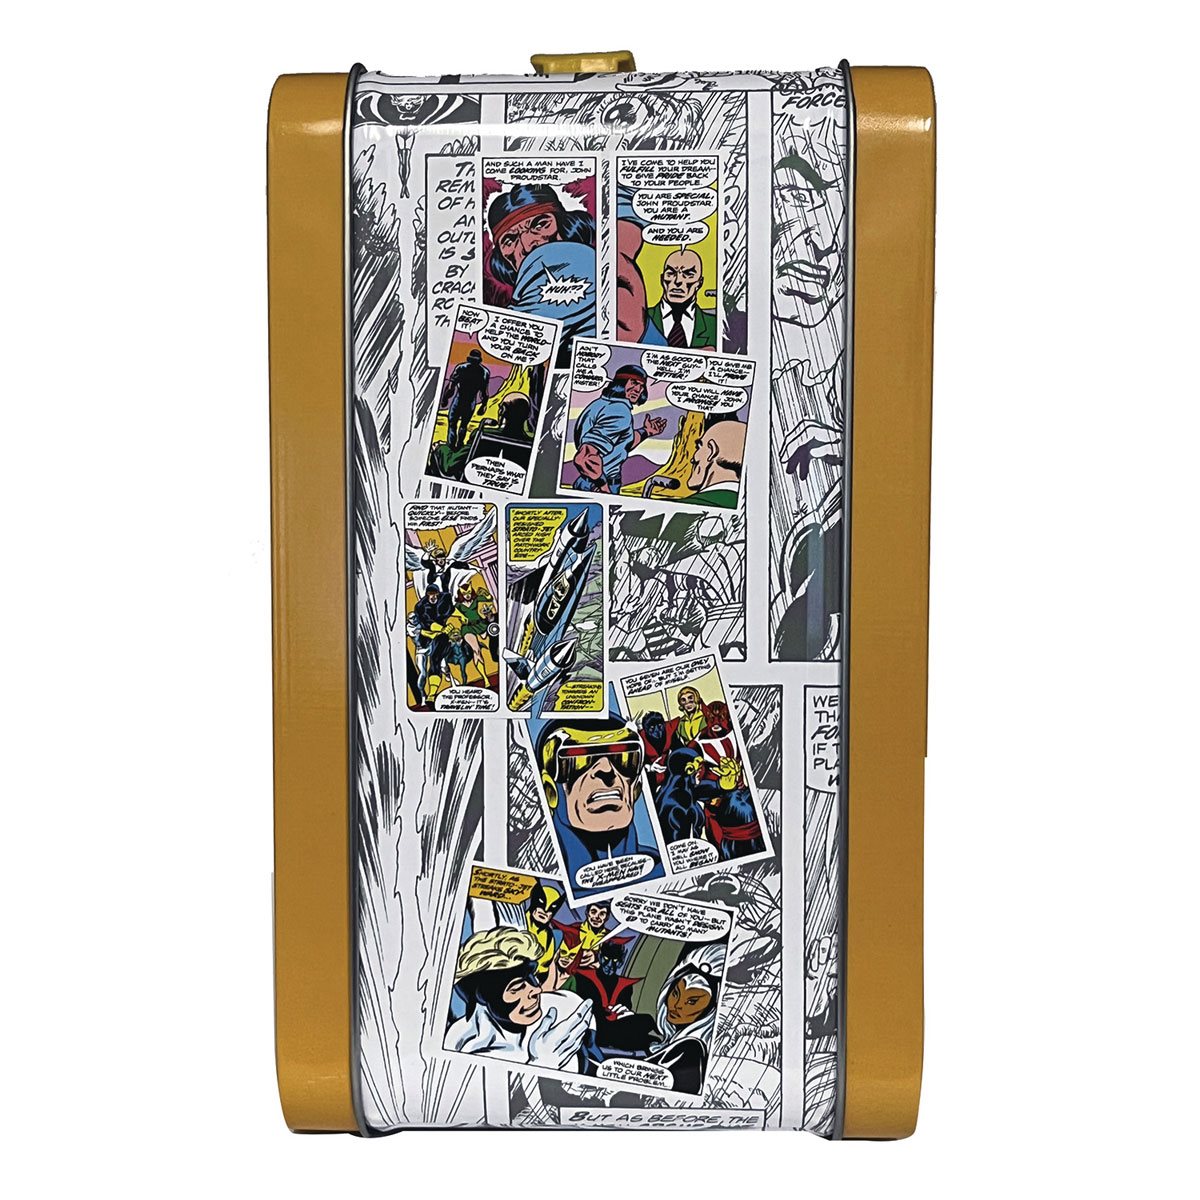 Wolverine Lunch Box and Thermos PX Previews Exclusive